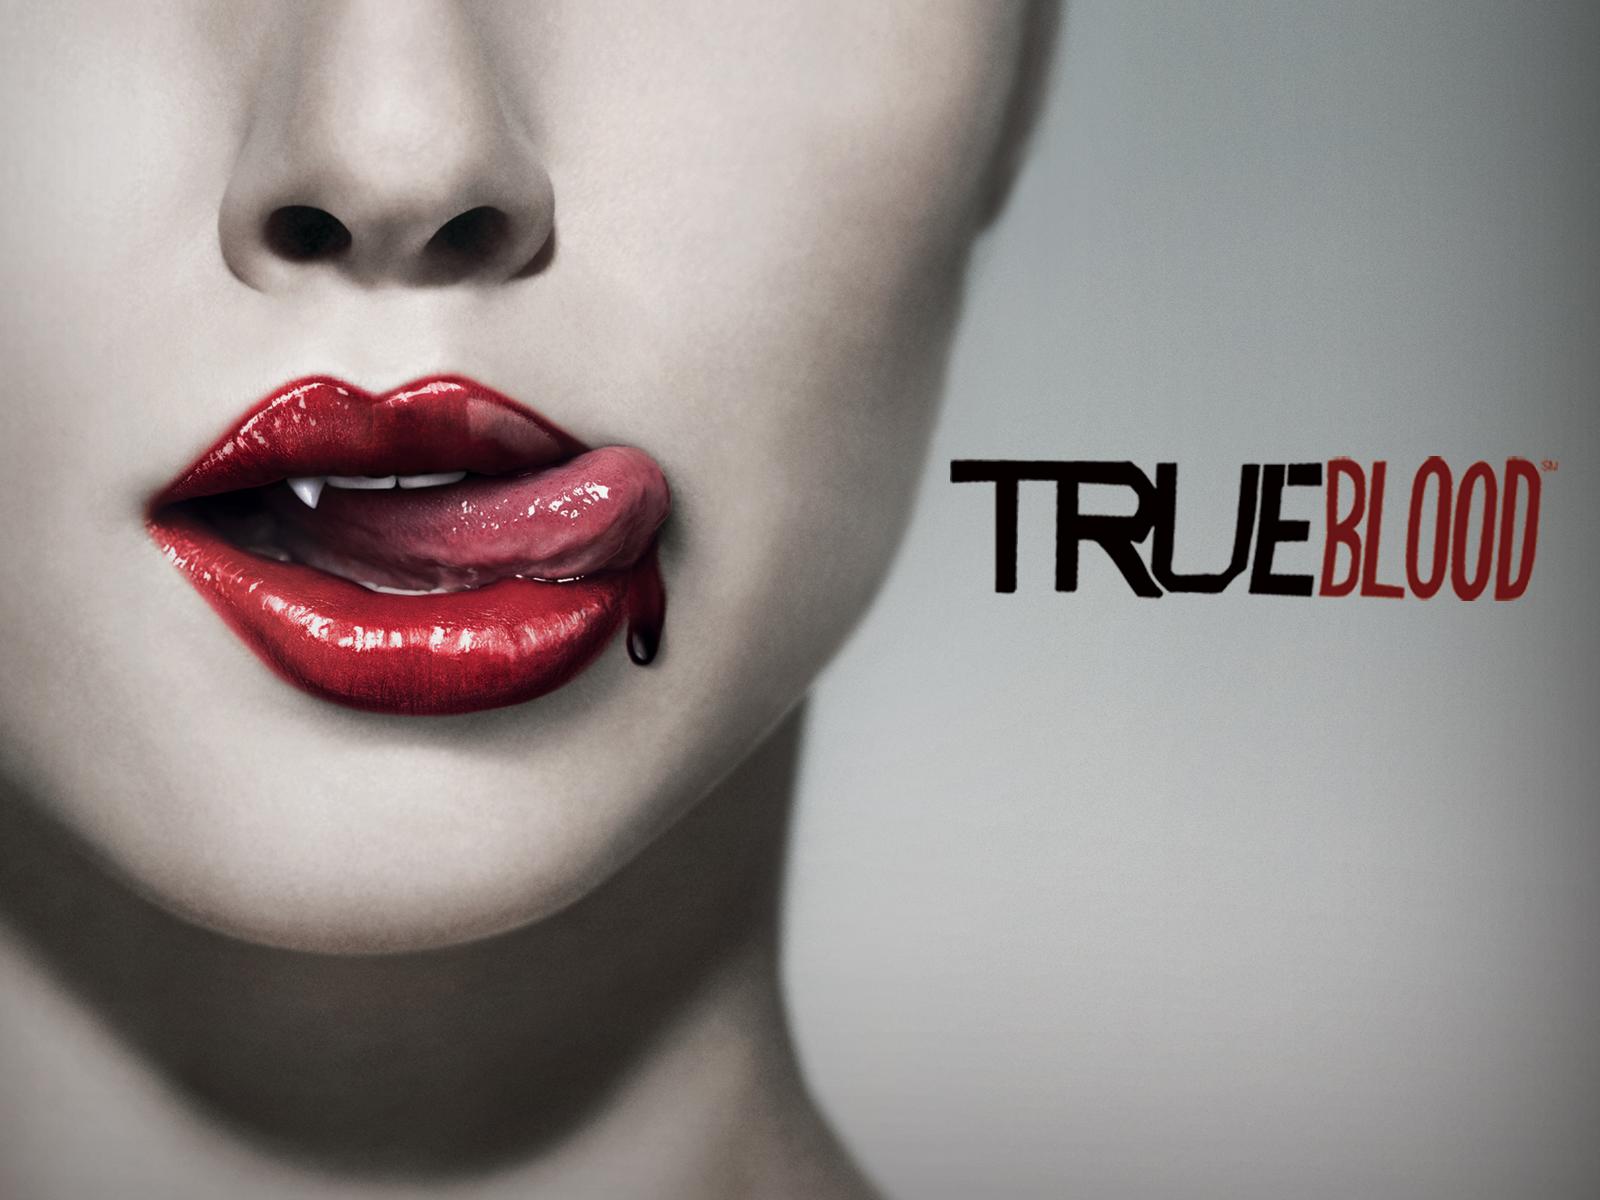 dorothy reiter recommends True Blood Season 1 Streaming